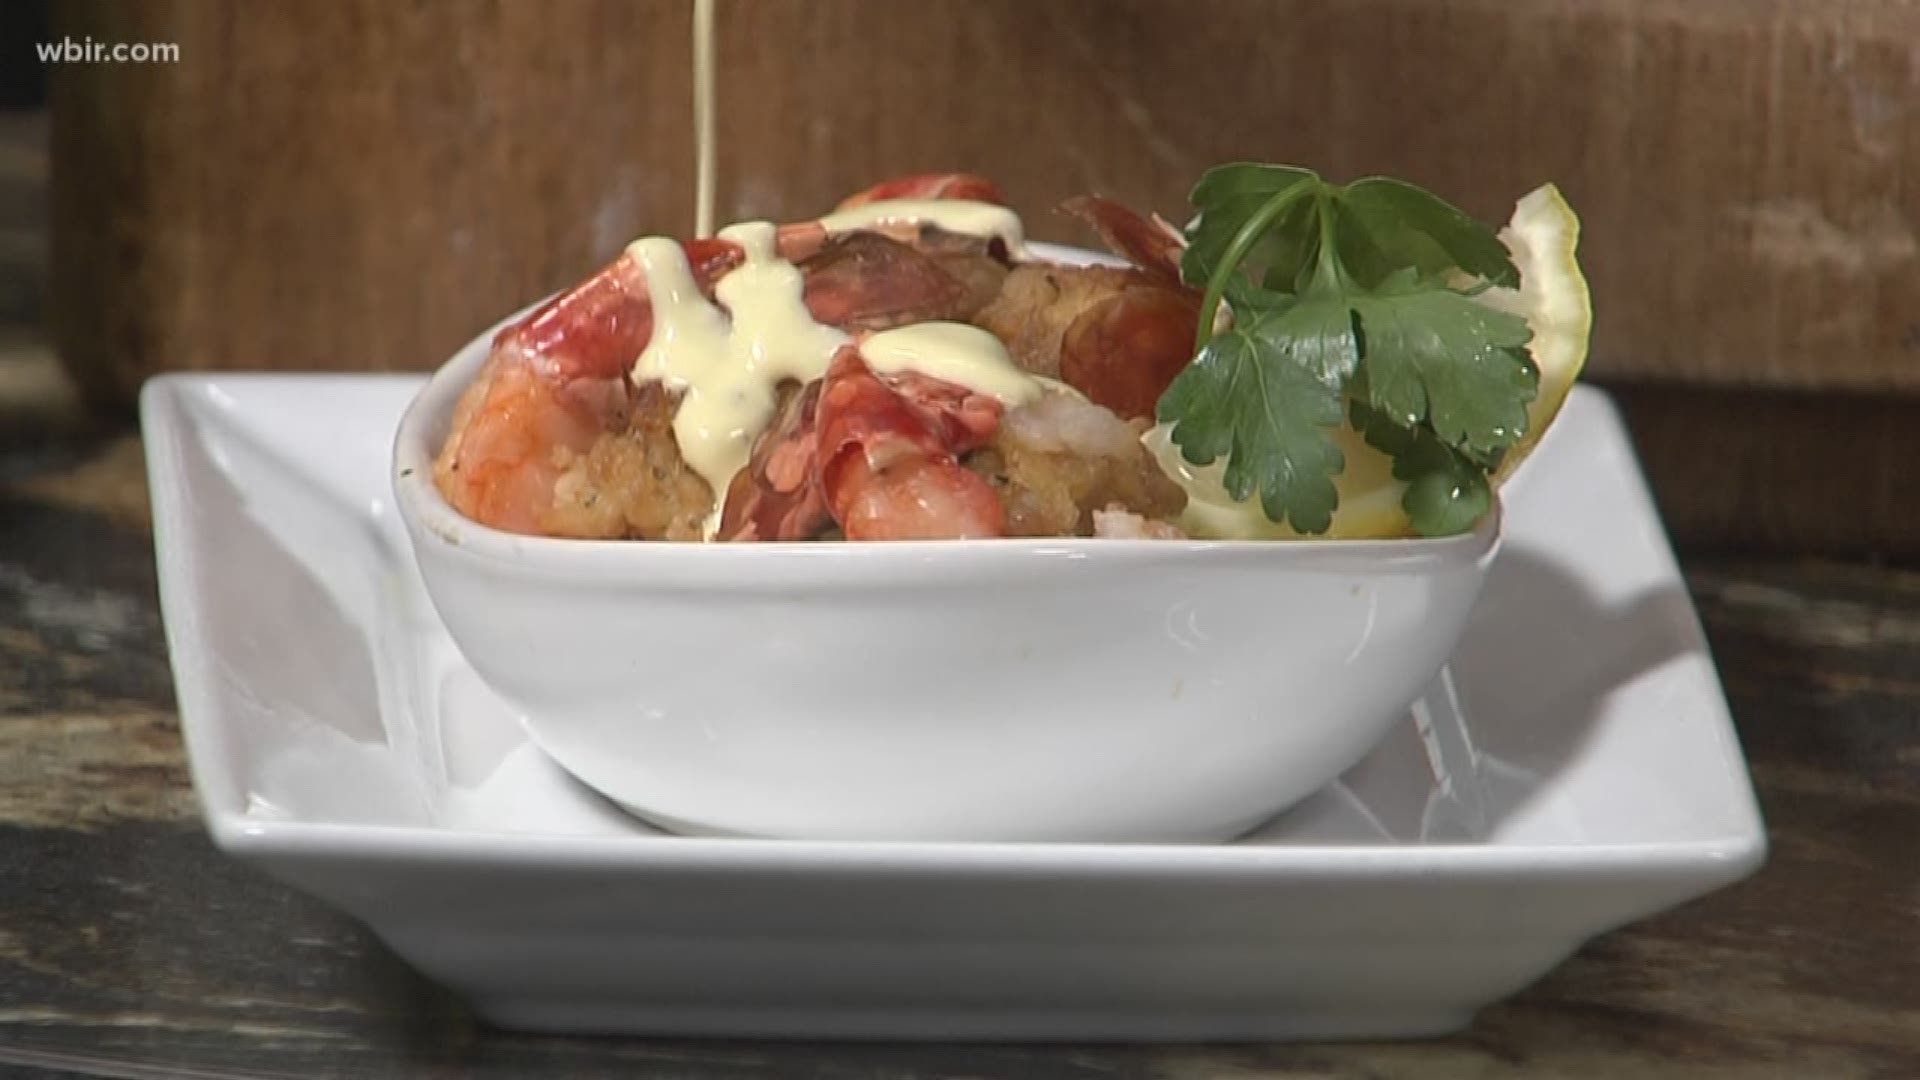 We are in the kitchen with Chef Frank who has a big dish for us: Baked Stuffed Shrimp.